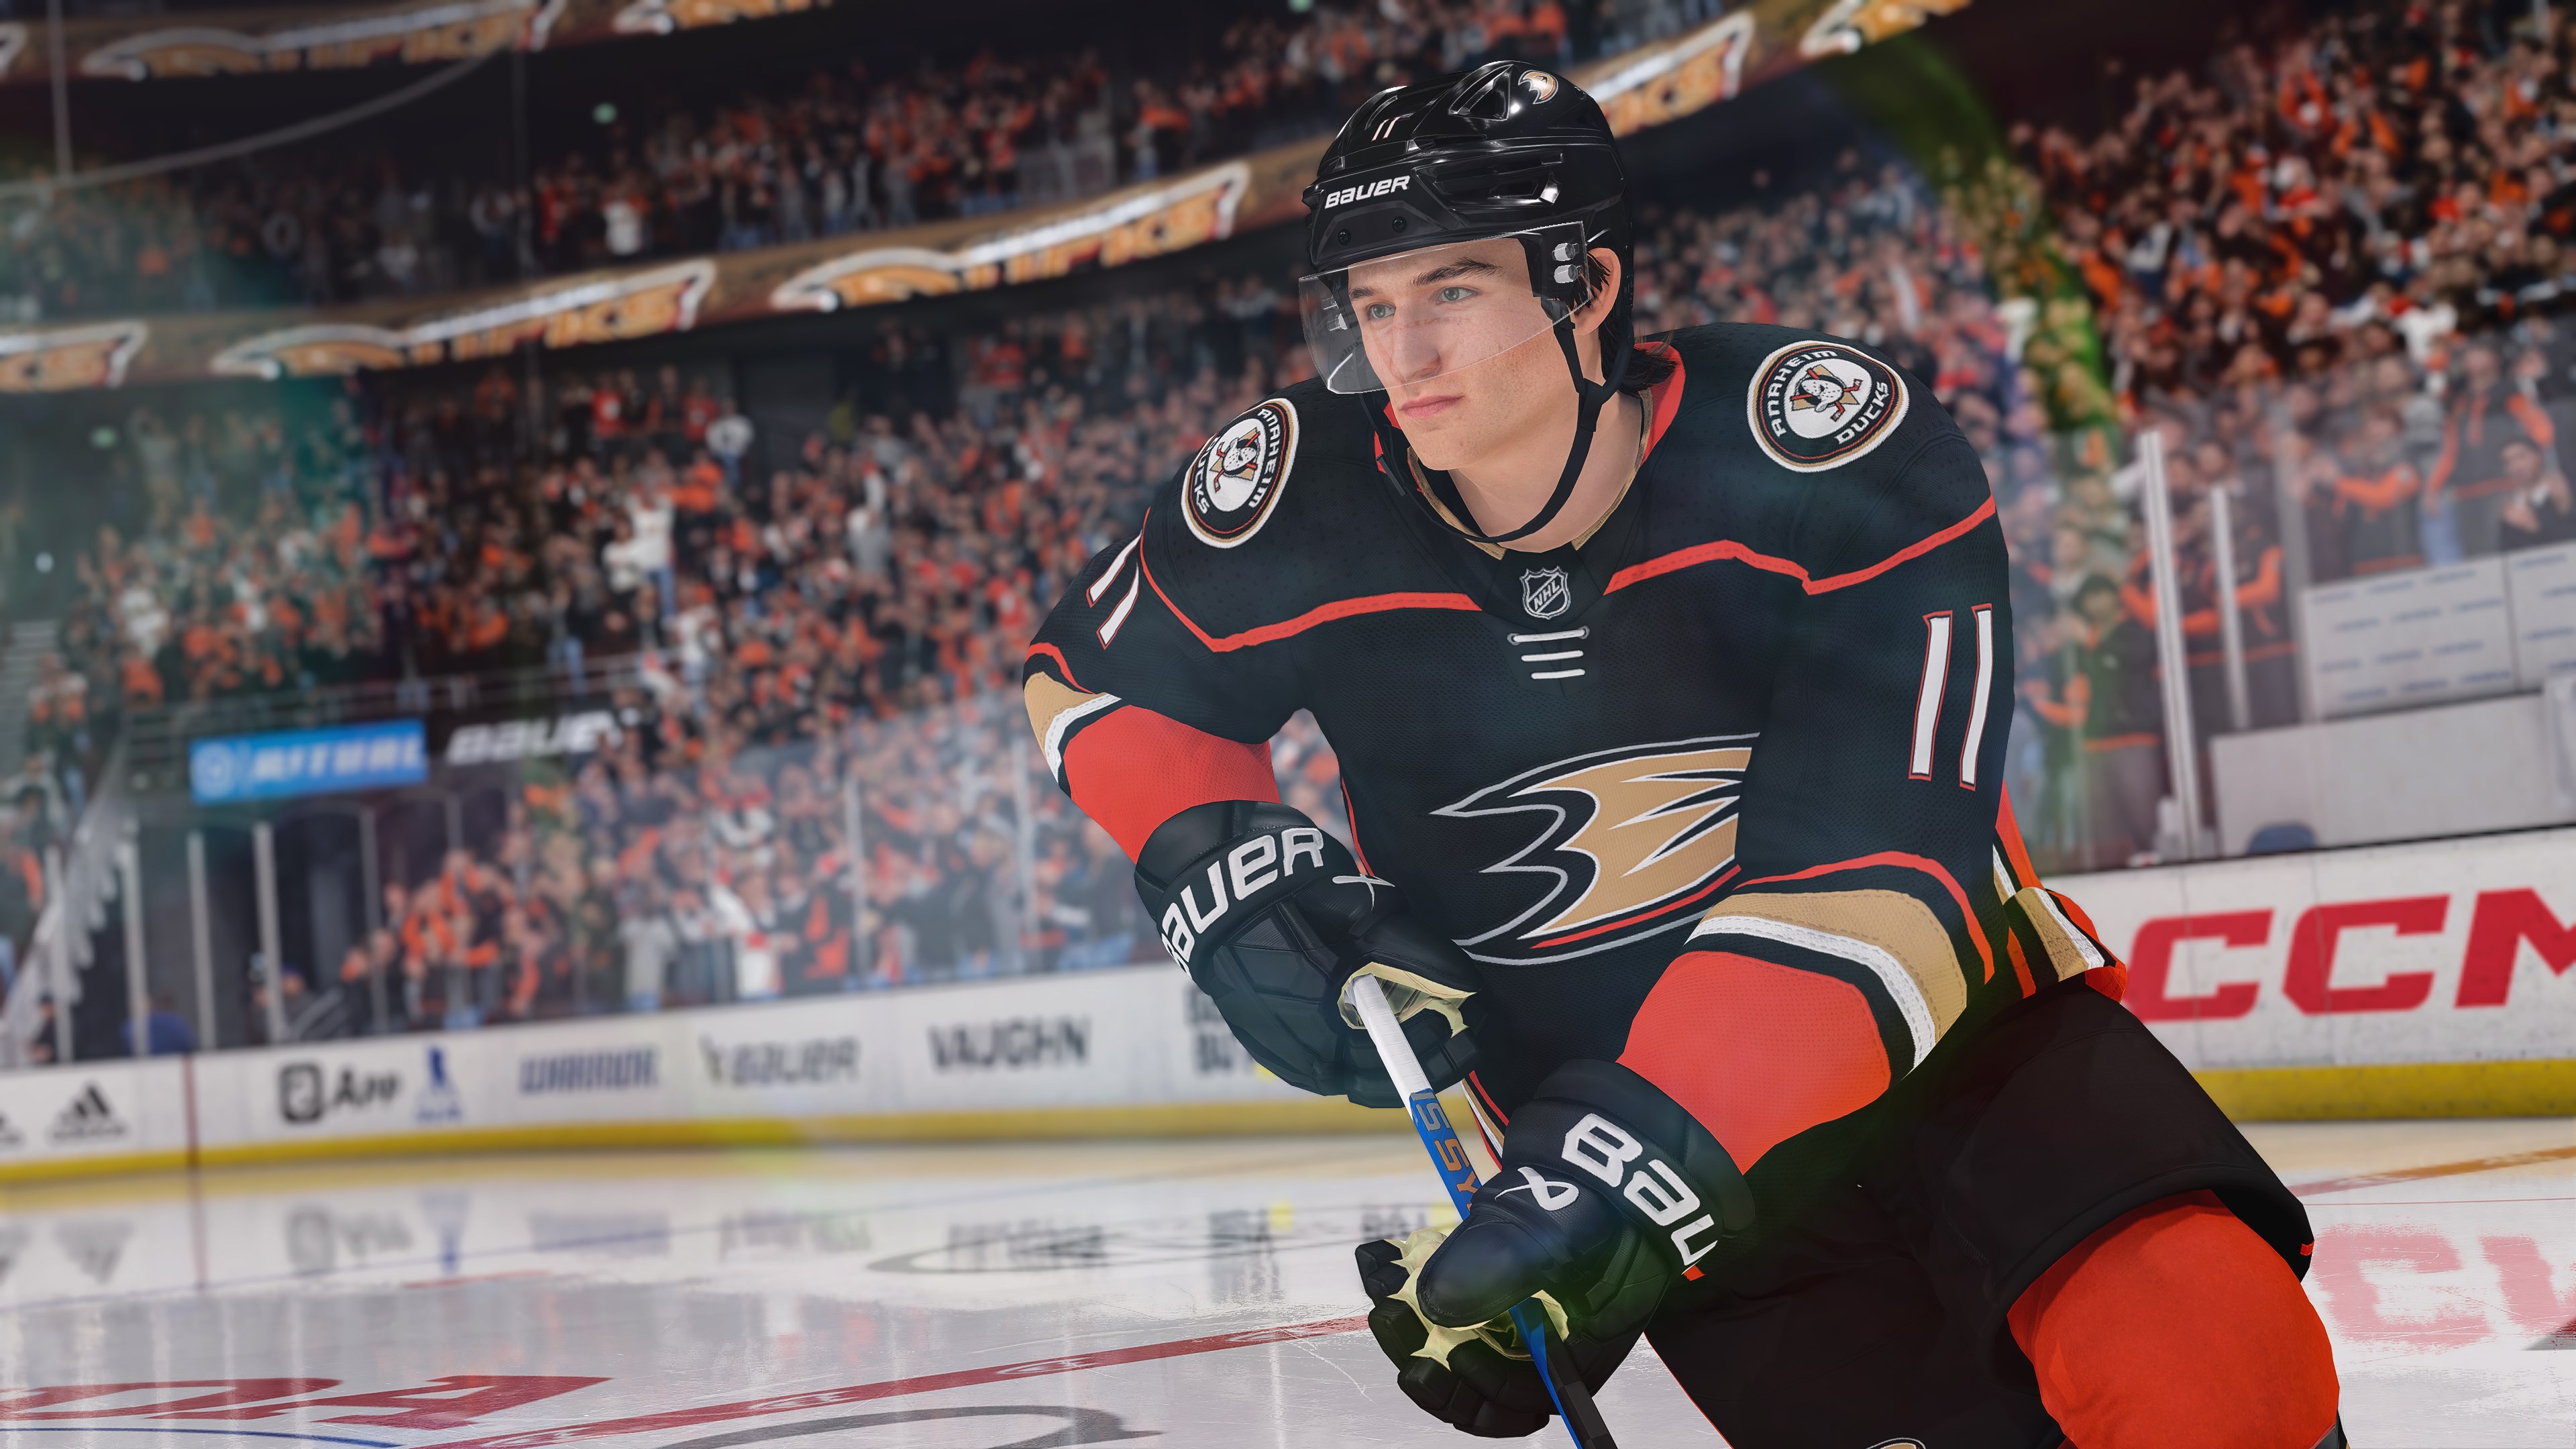 NHL 23 PlayStation 4 Account Pixelpuffin.net Activation Link